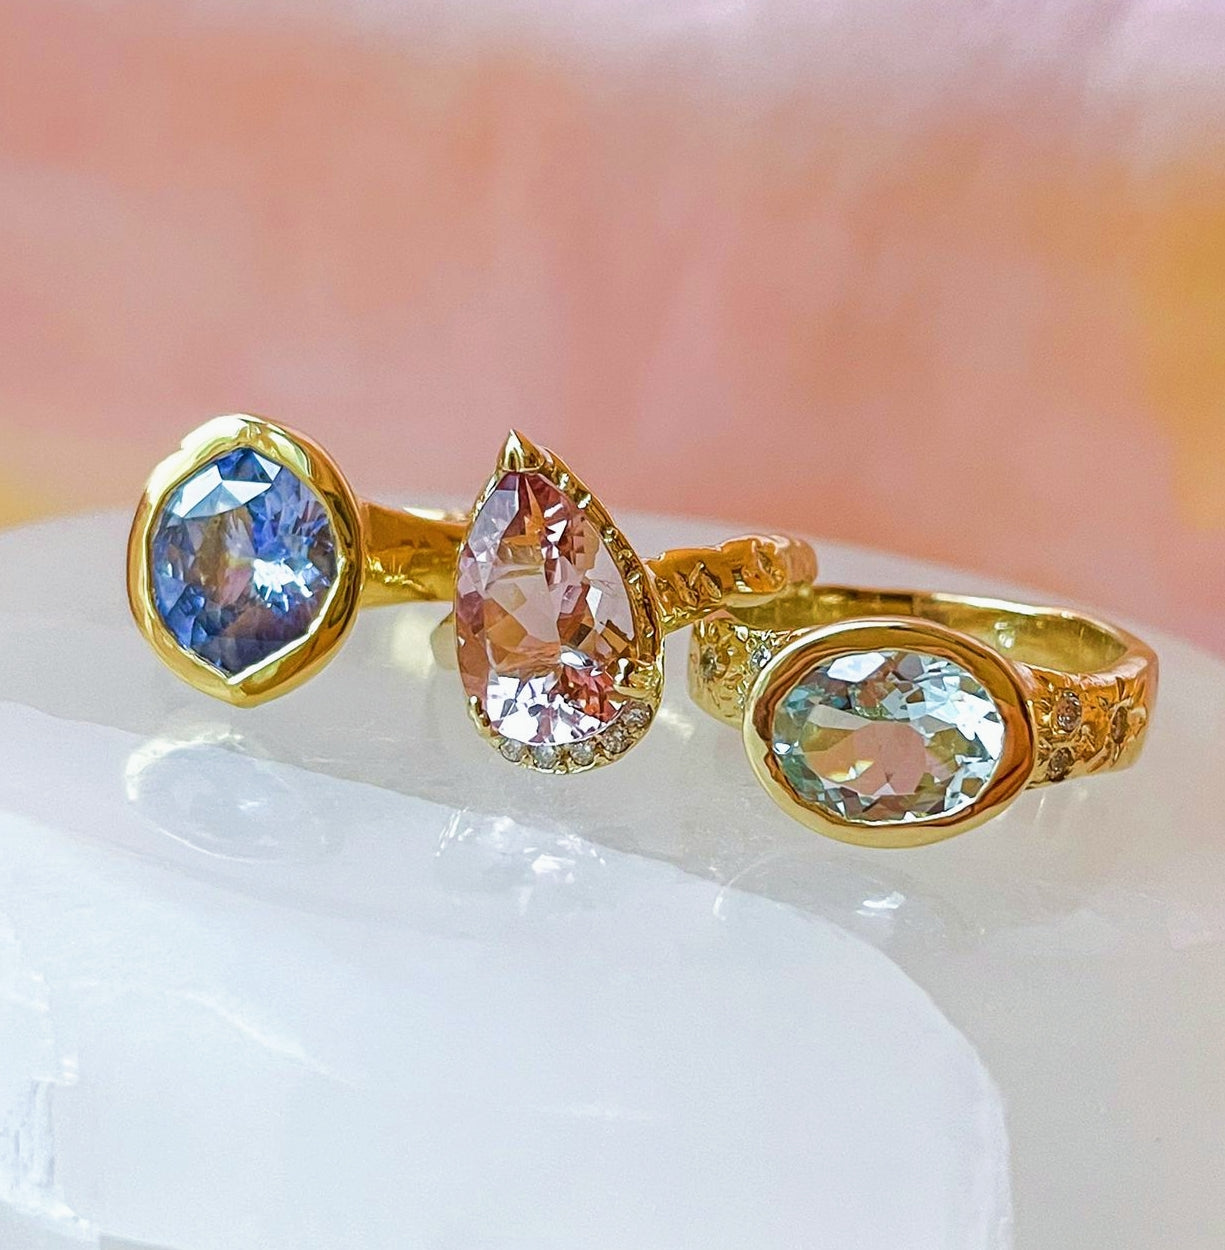 Magnificent Pear Ring